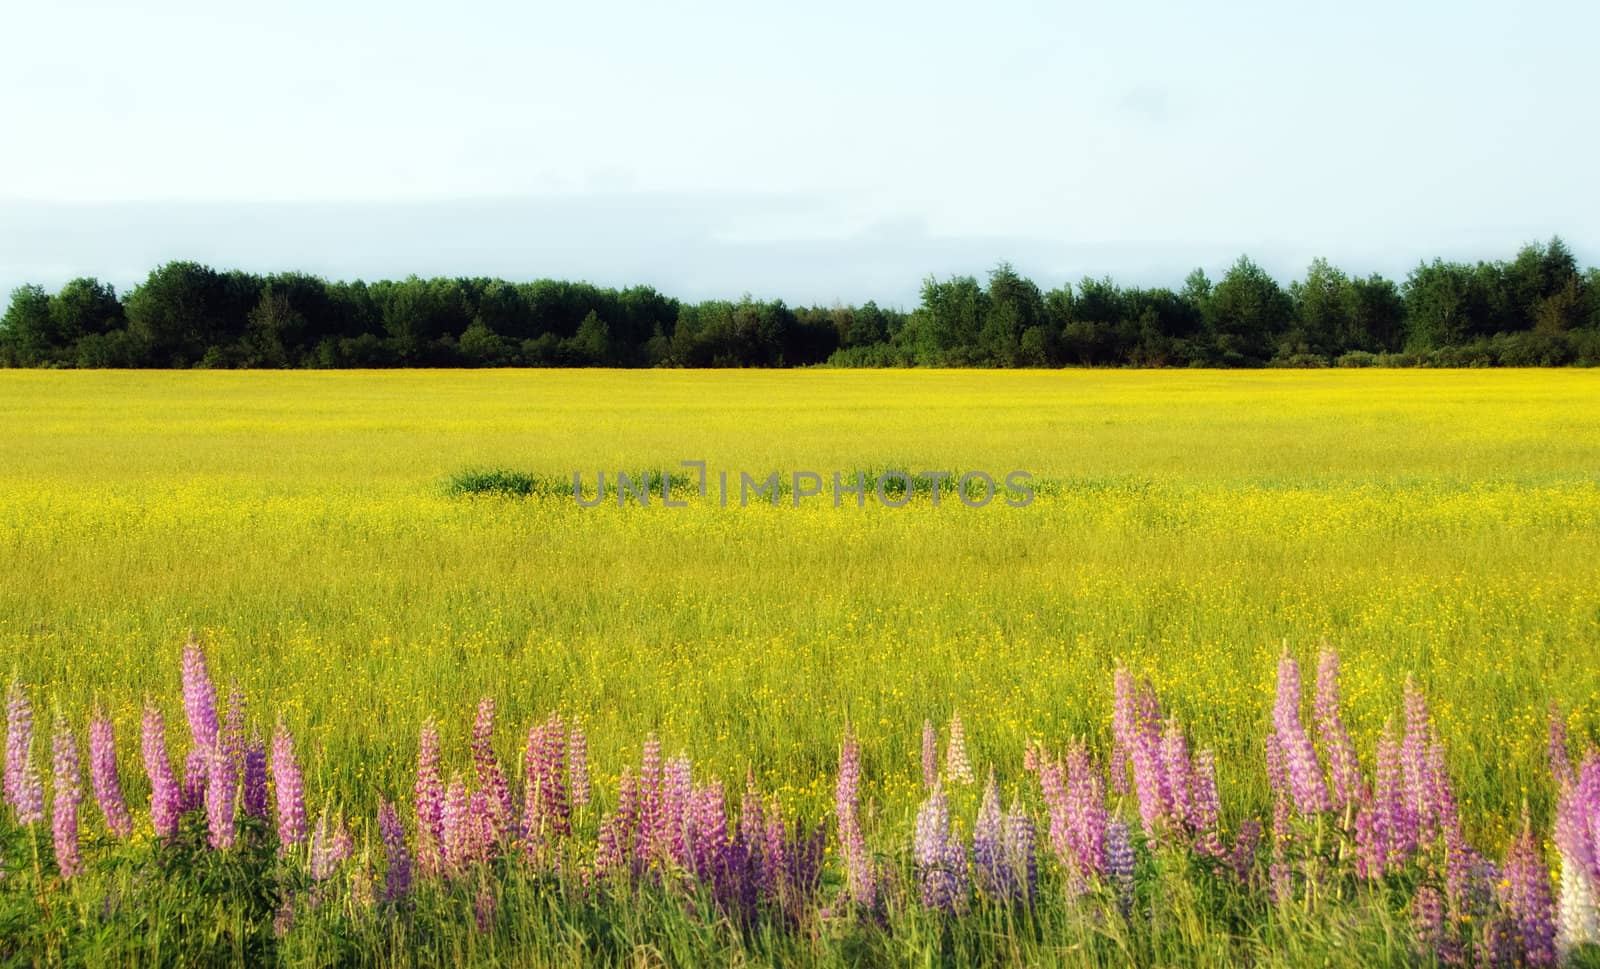 Wild lupines growing in a beside a cultivated field